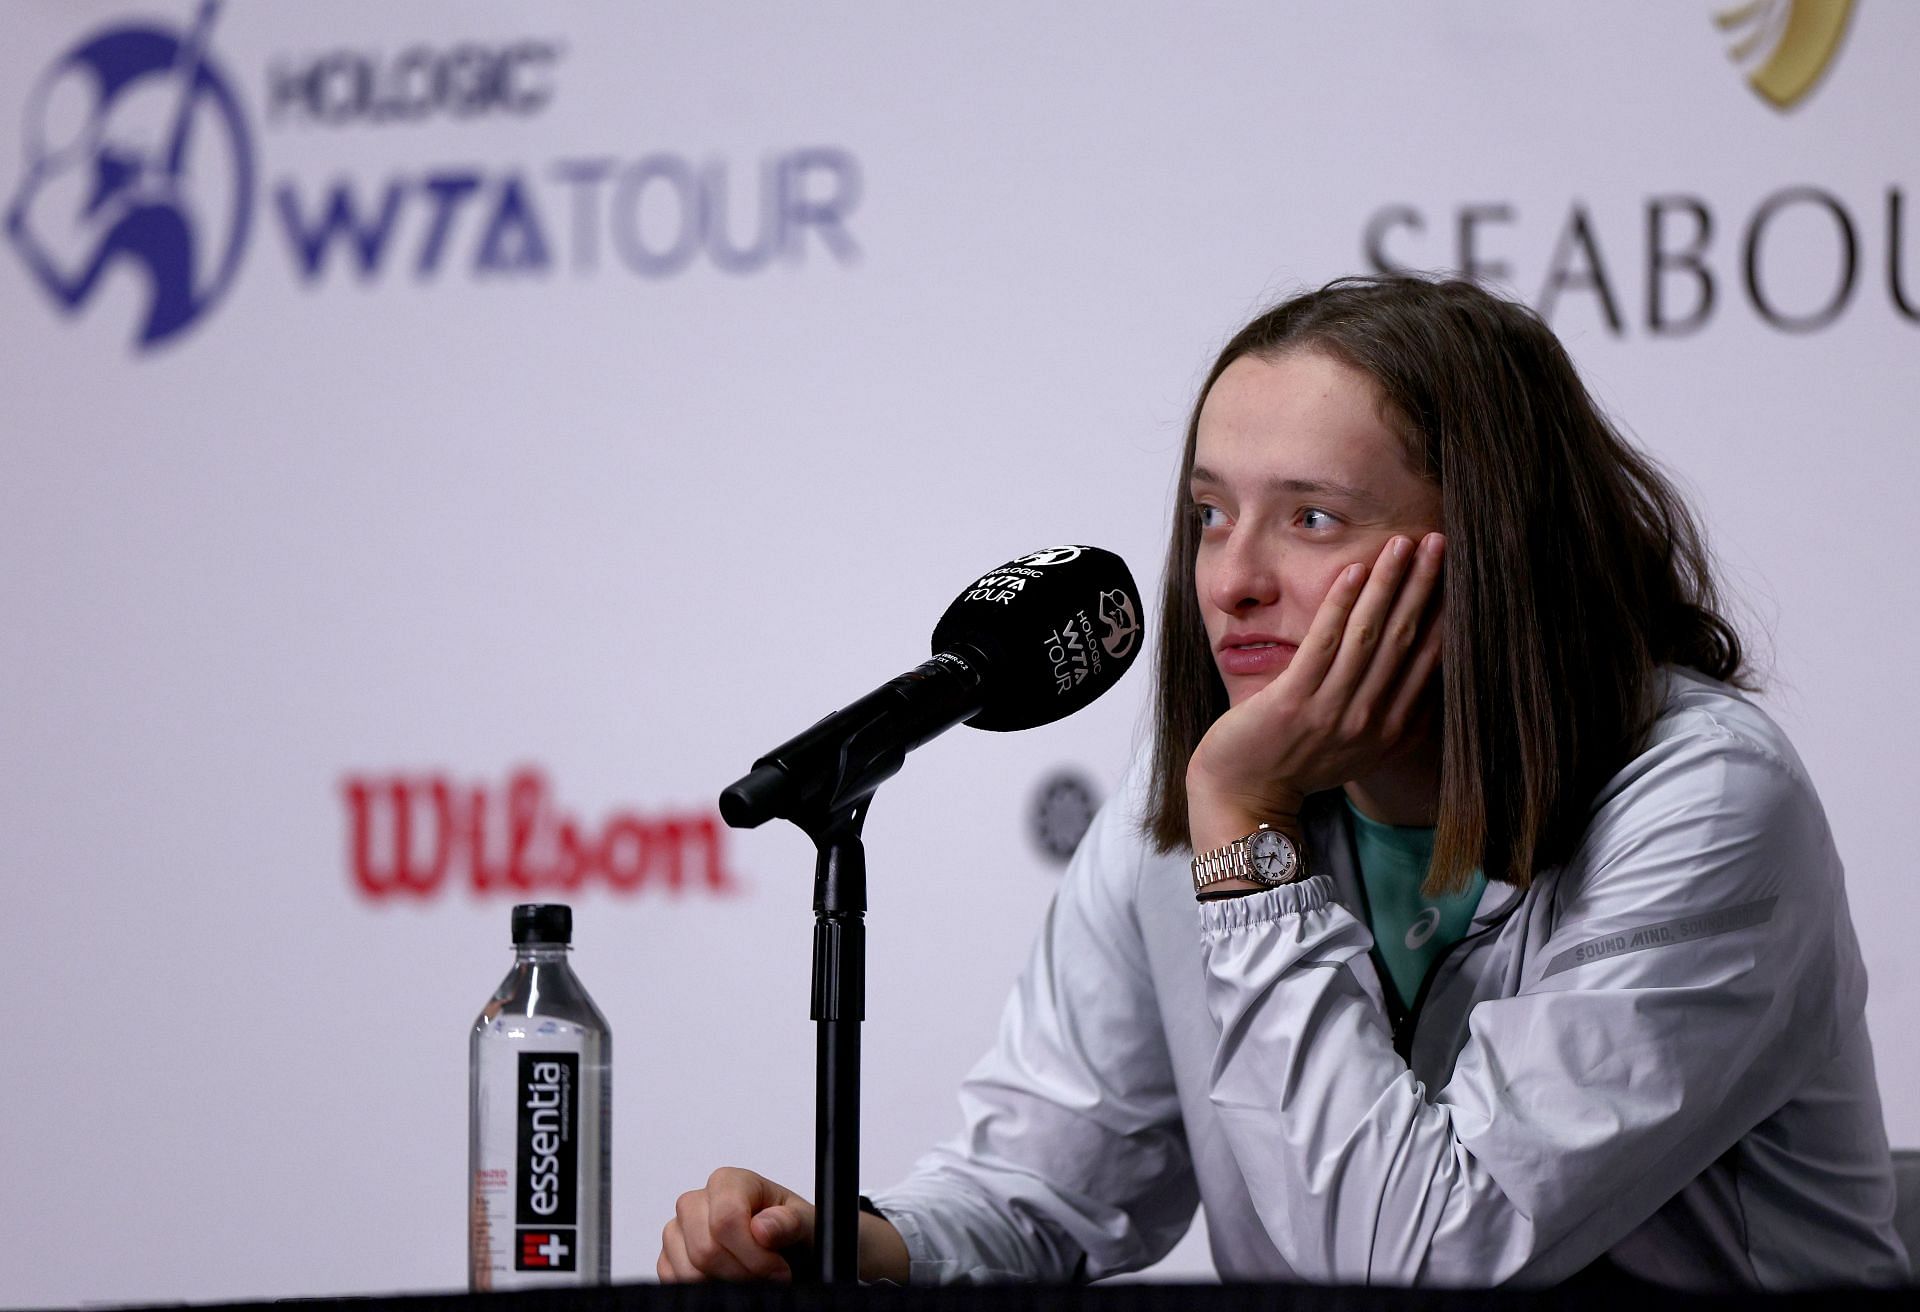 Iga Swiatek during a press conference after the match